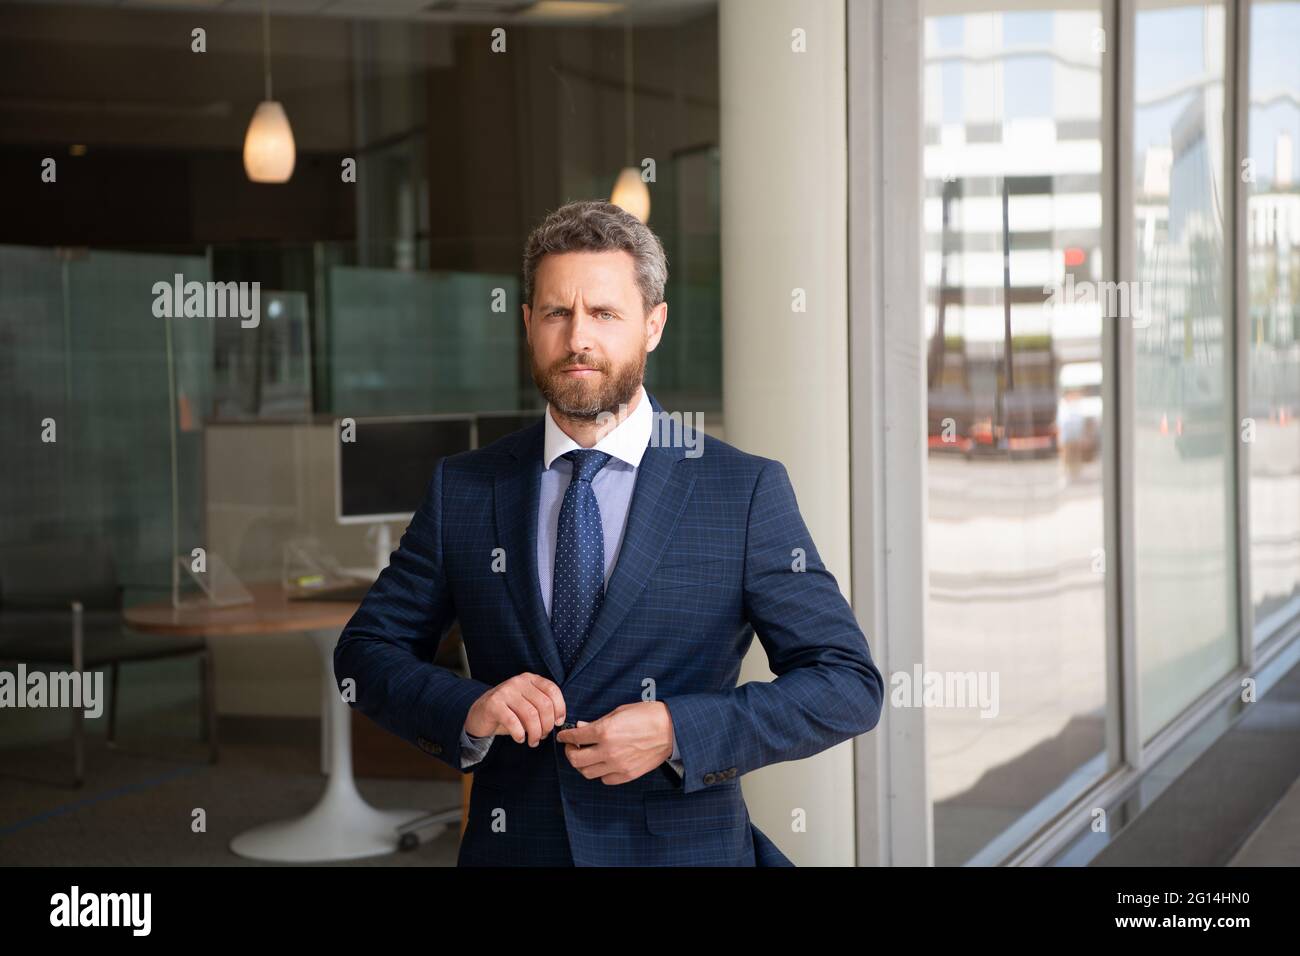 man businessman in businesslike suit at business office, business success Stock Photo